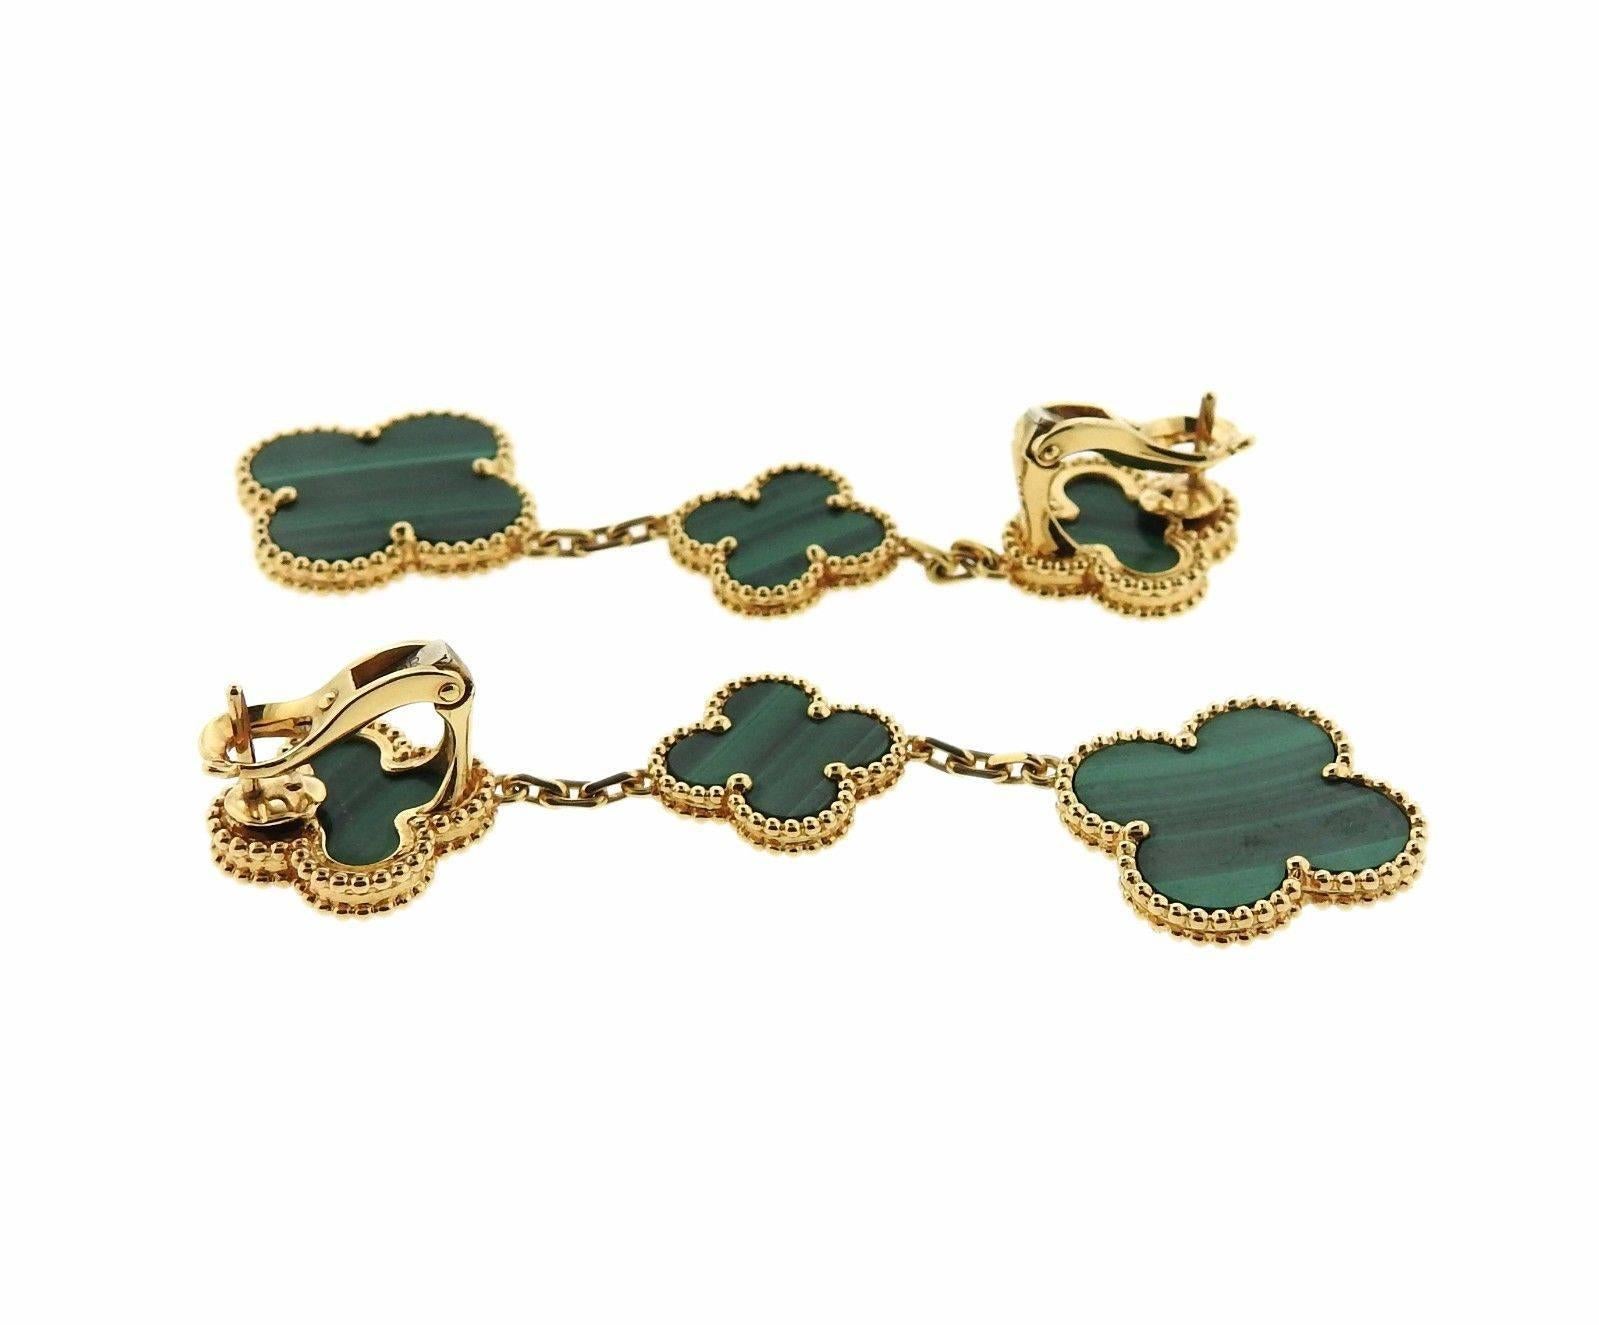 A pair of beautiful three motif drop earrings, crafted by Van Cleef & Arpels for iconic Magic Alhambra collection, with malachite stones.  Earrings are 68mm long x 20mm wide. Marked: VCA, au750, JB167933. Weight: 19.5 grams
Retail $9350, come with